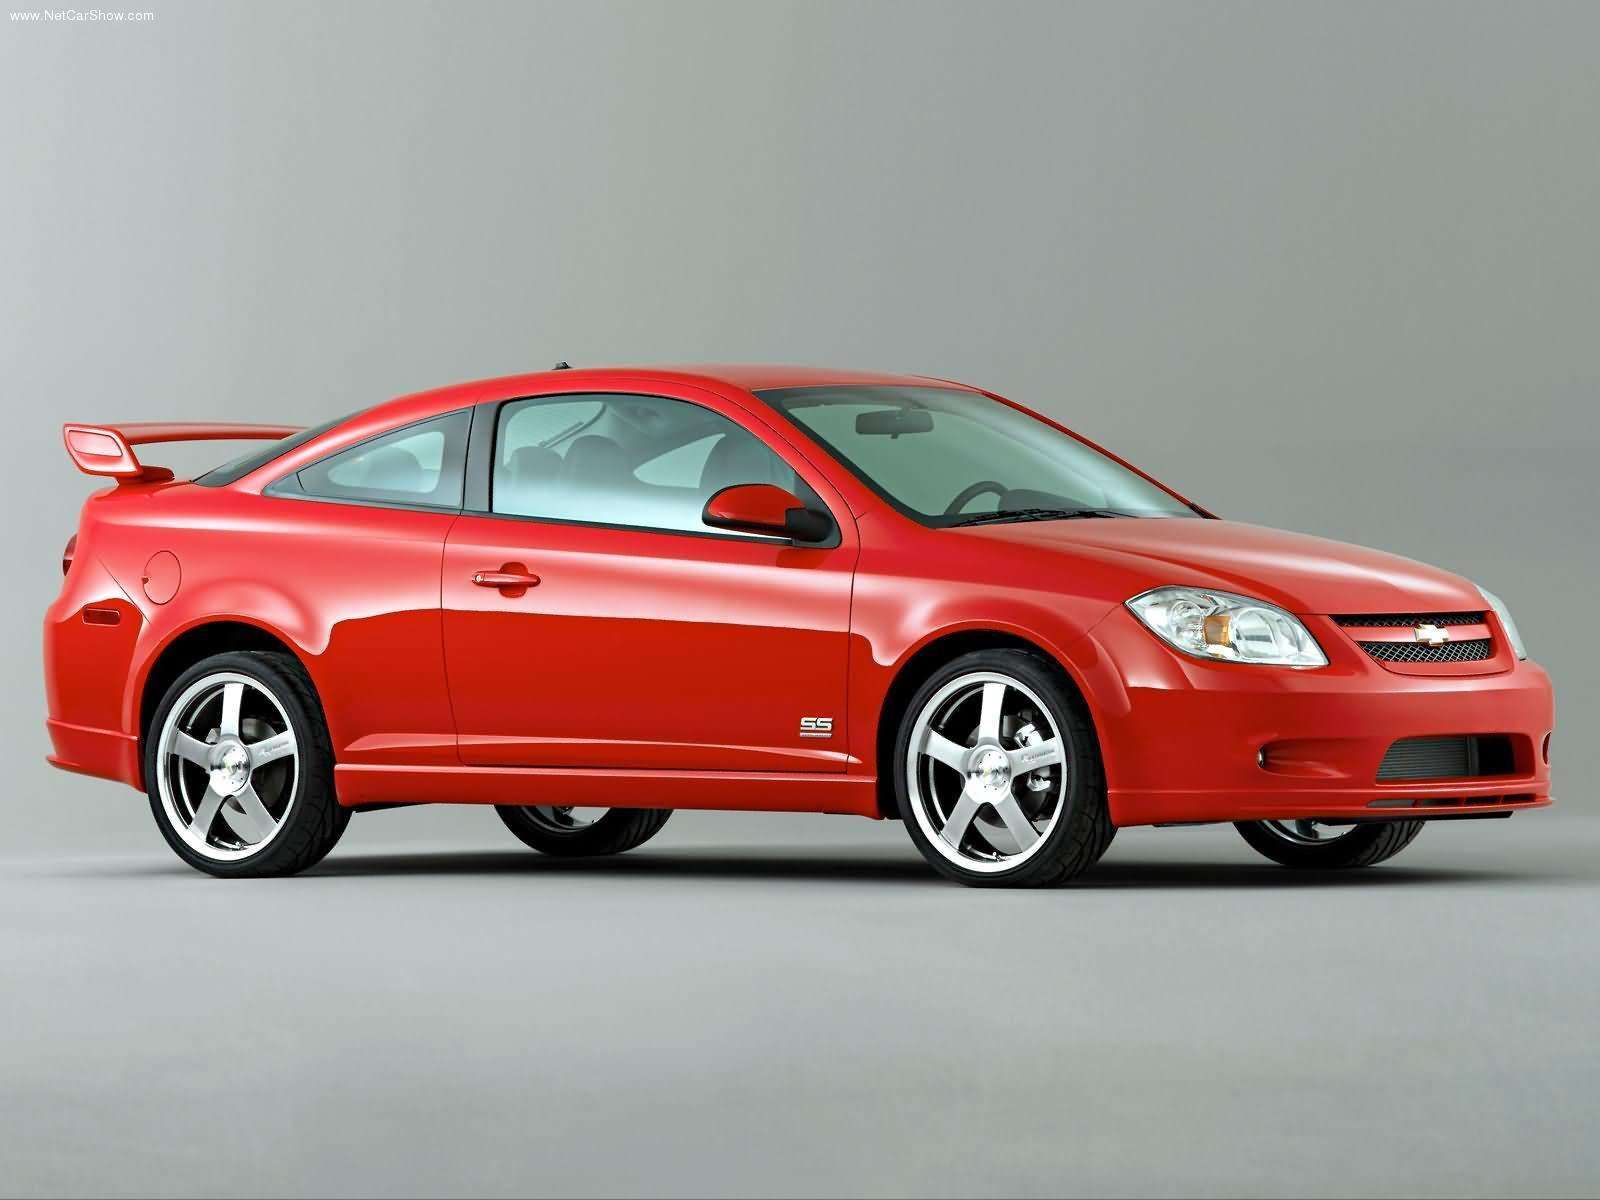 Chevrolet Cobalt 2 Dr SS 0 60 Times, Top Speed, Specs, Quarter Mile, And Wallpaper United States / USA